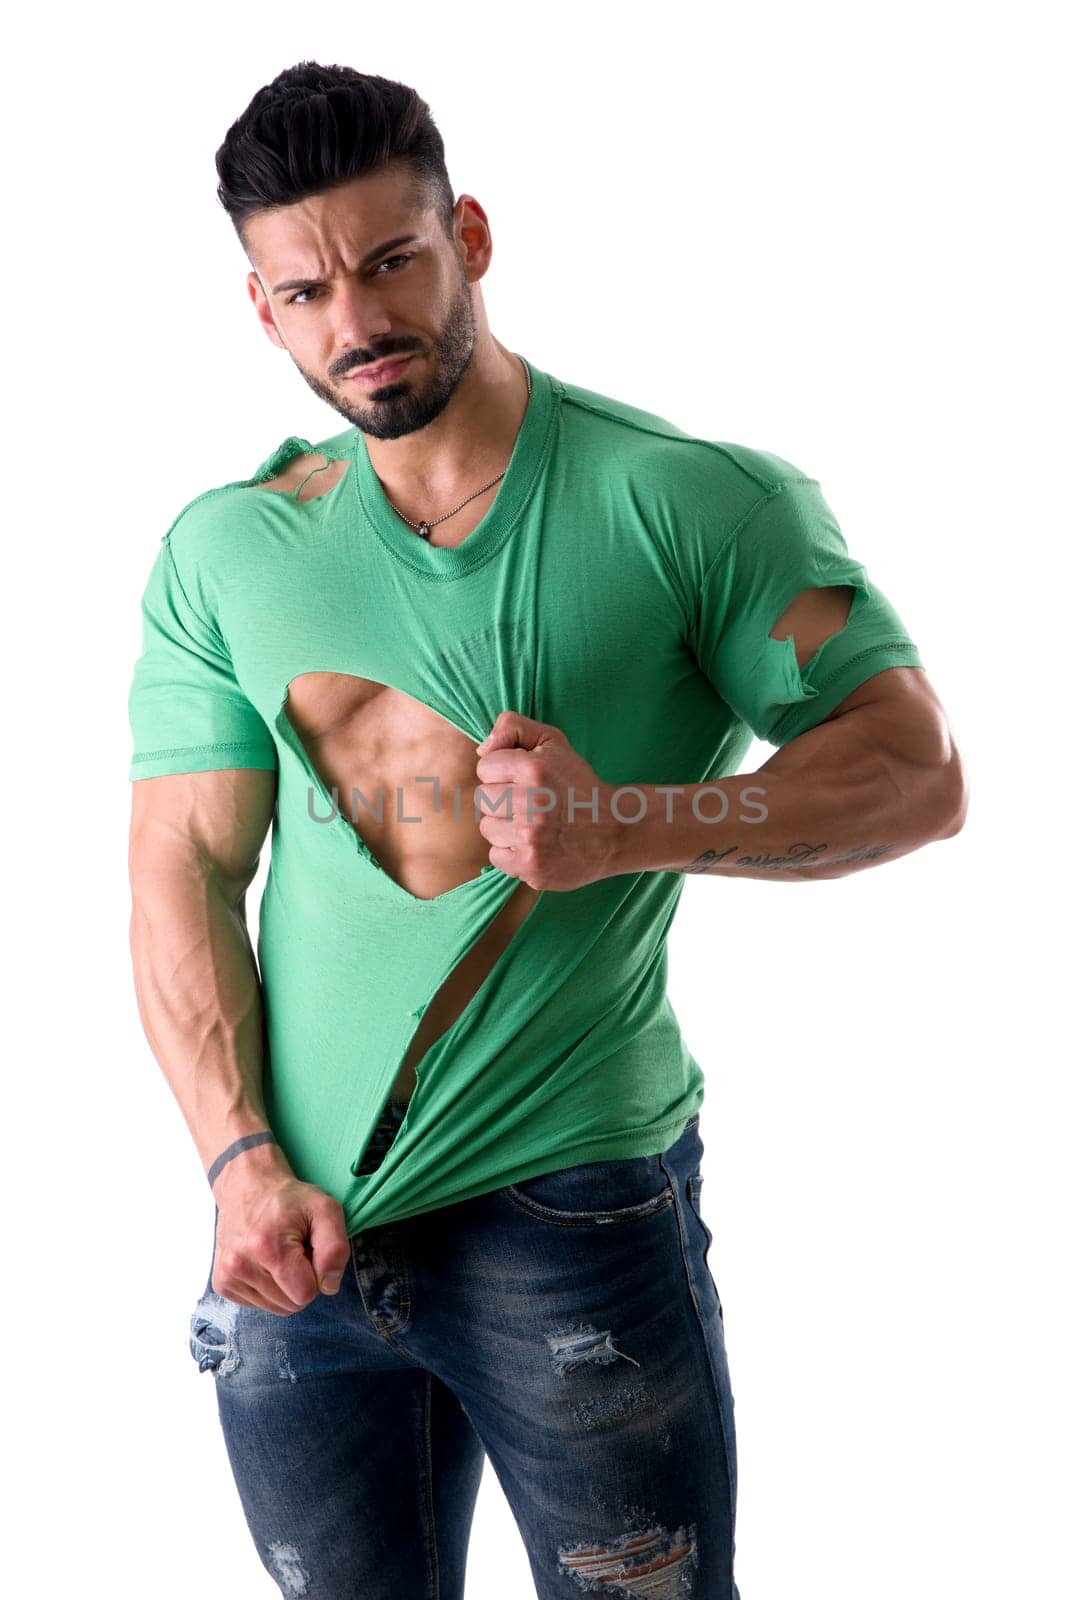 Attractive muscular strong man in ripped t shirt, isolated on white background in studio, looking at camera